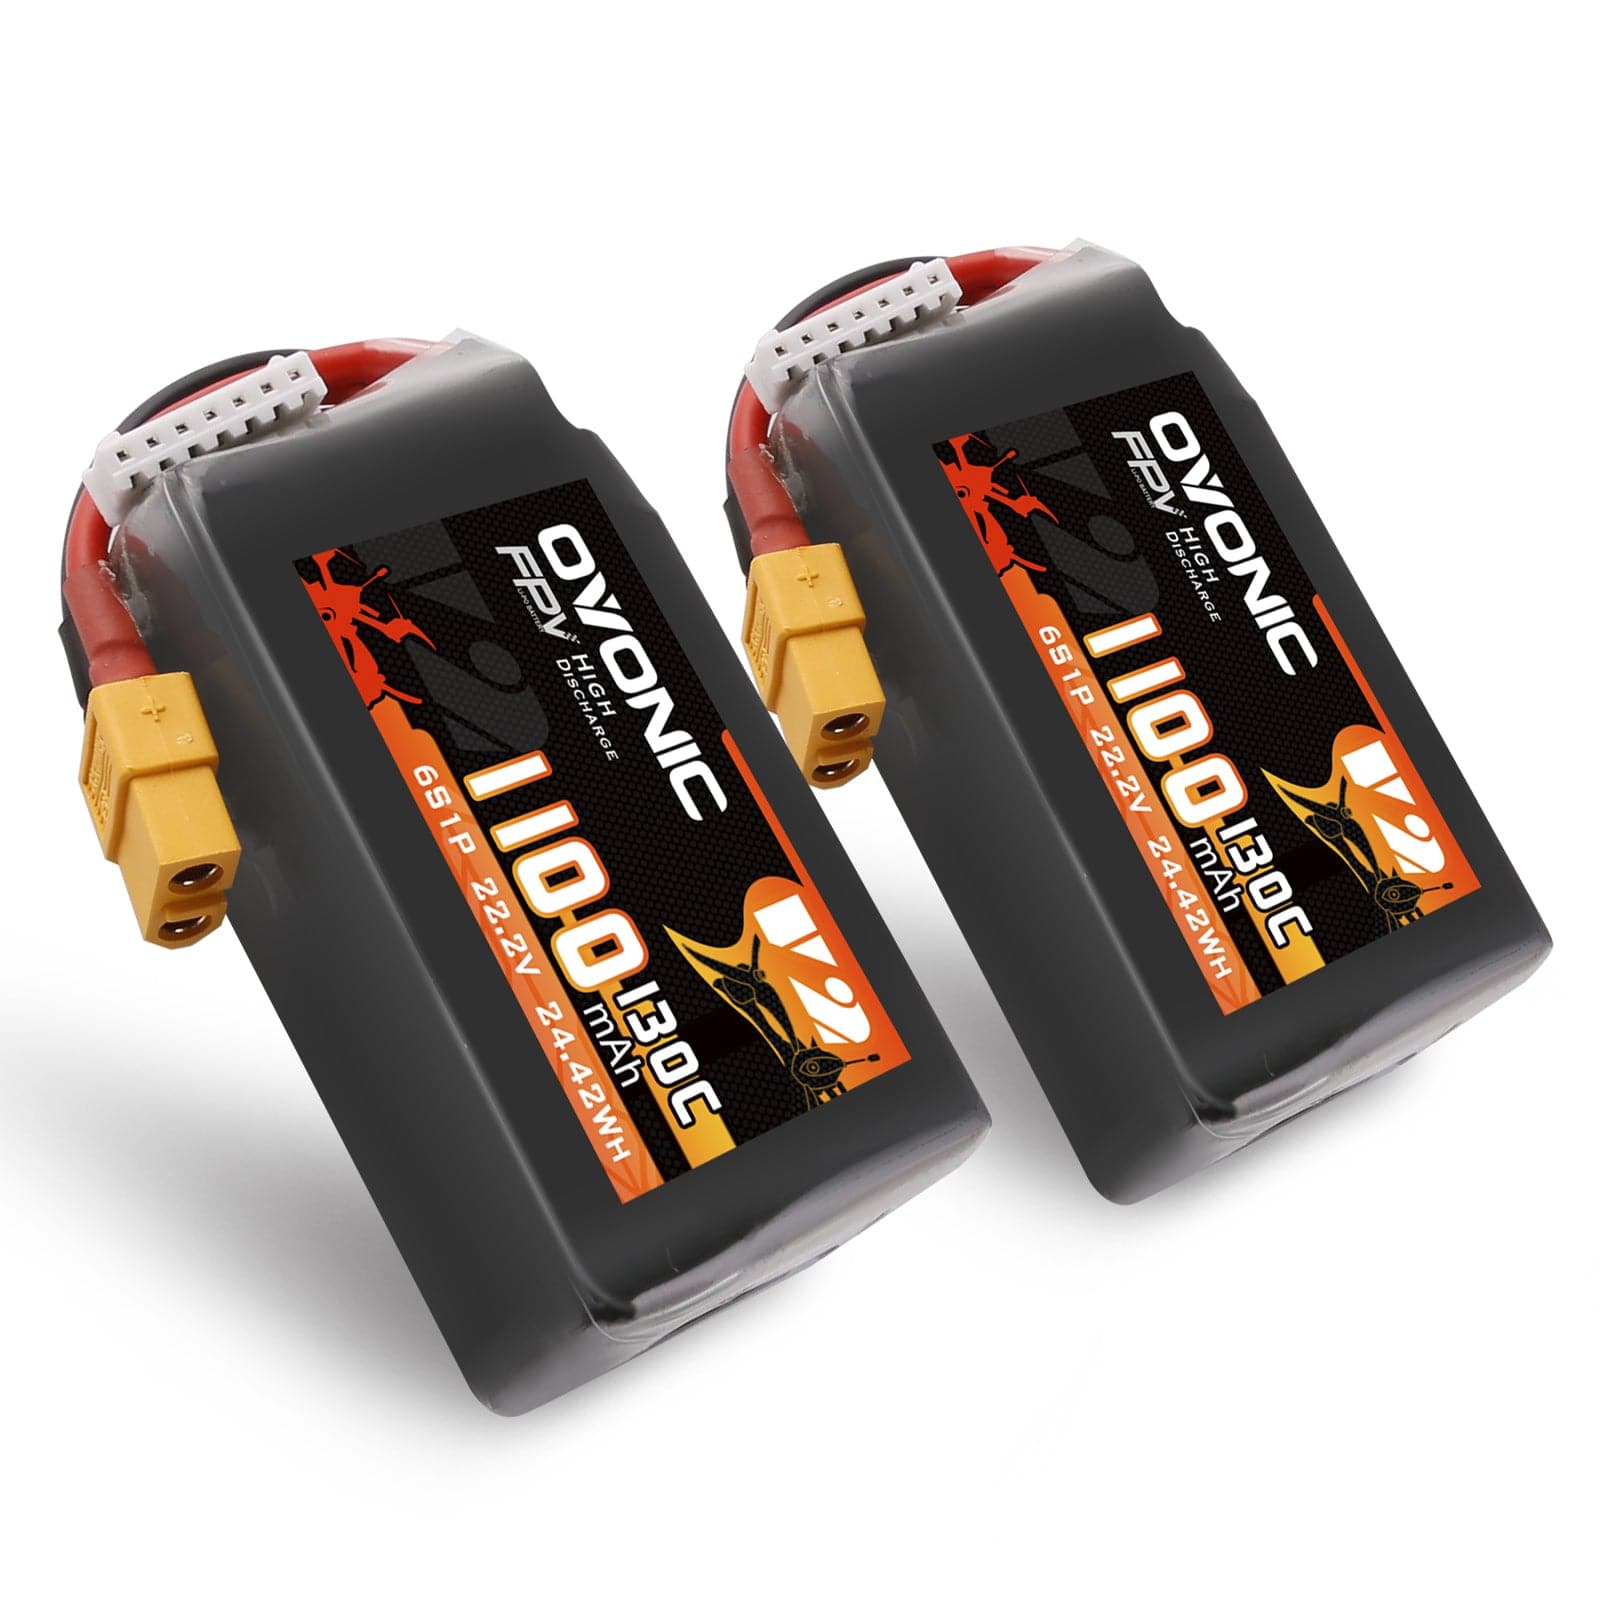 2x Ovonic 130C 6S 1100mah Lipo Battery 22.2V Pack with XT60 Plug for FPV freestyle